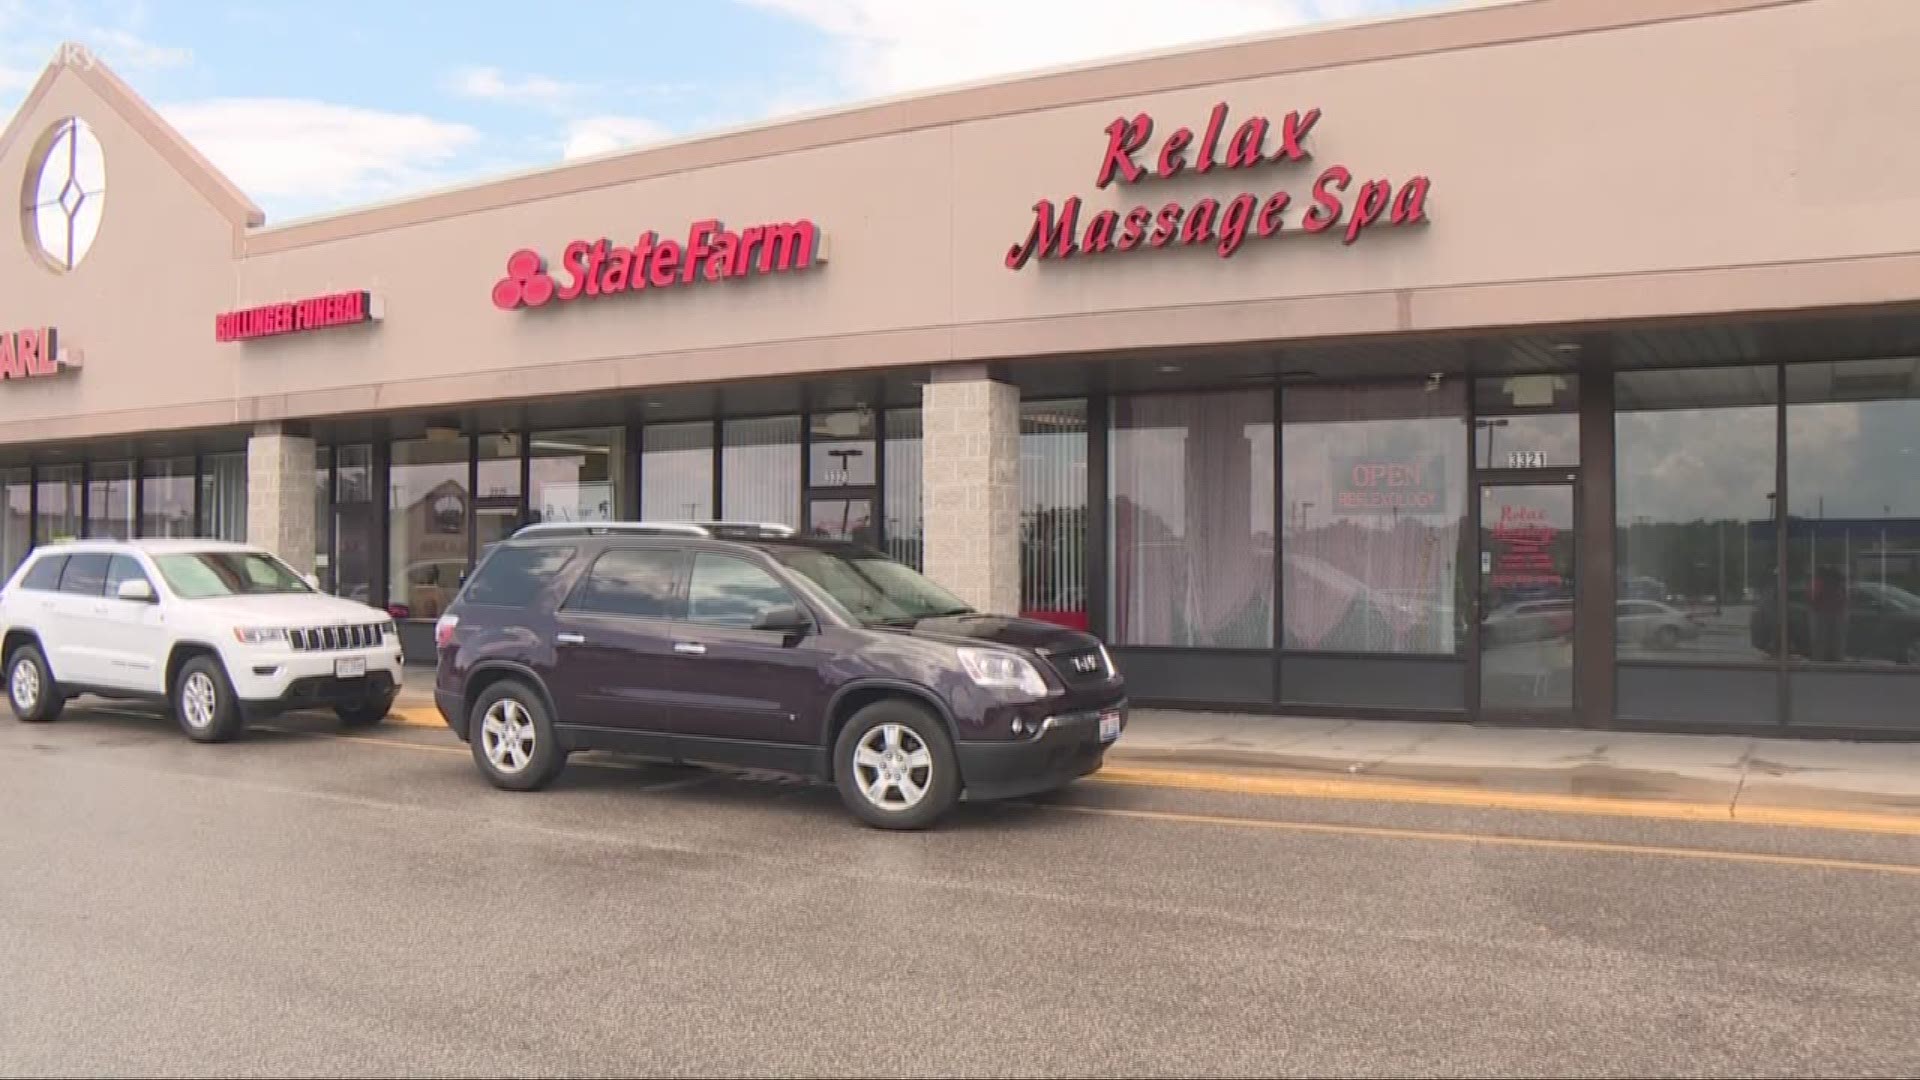 Local, state, and federal law enforcement officers have raided more than a dozen massage parlors throughout Northeast Ohio in connection with a human trafficking investigation, the U.S. Secret Service confirmed to WKYC.